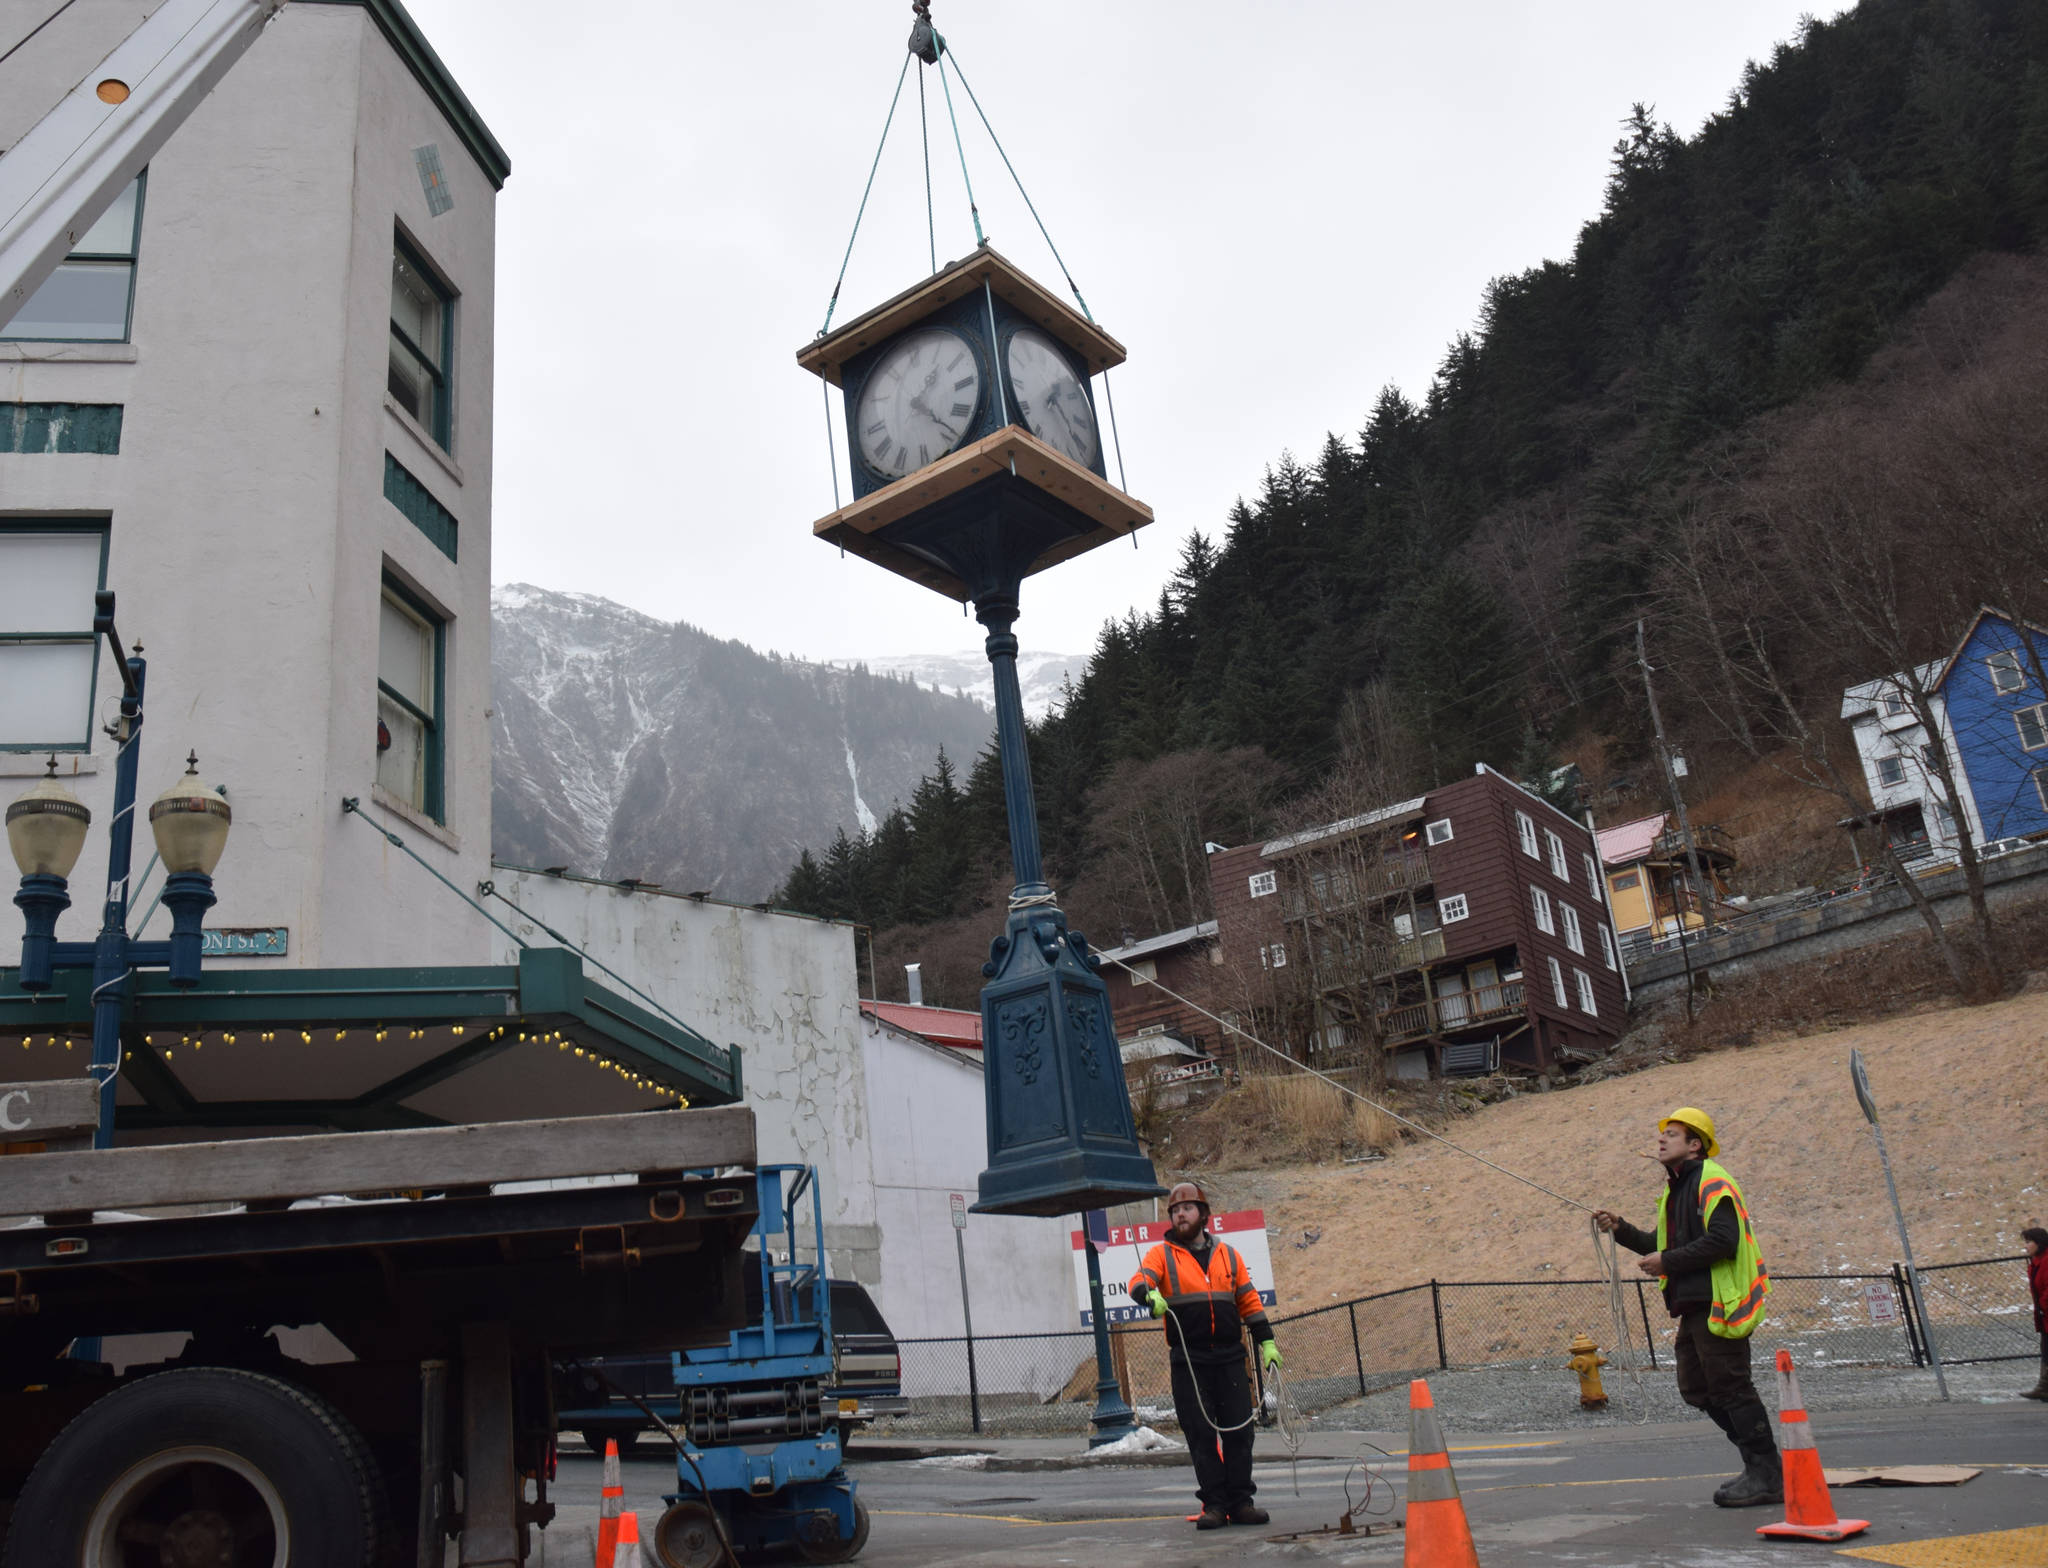 Tyler Blevins and Abe Ortega guide a clock on Front and Franklin streets as it’s hoisted onto a truck for transportation. (Kevin Gullufsen | Juneau Empire)